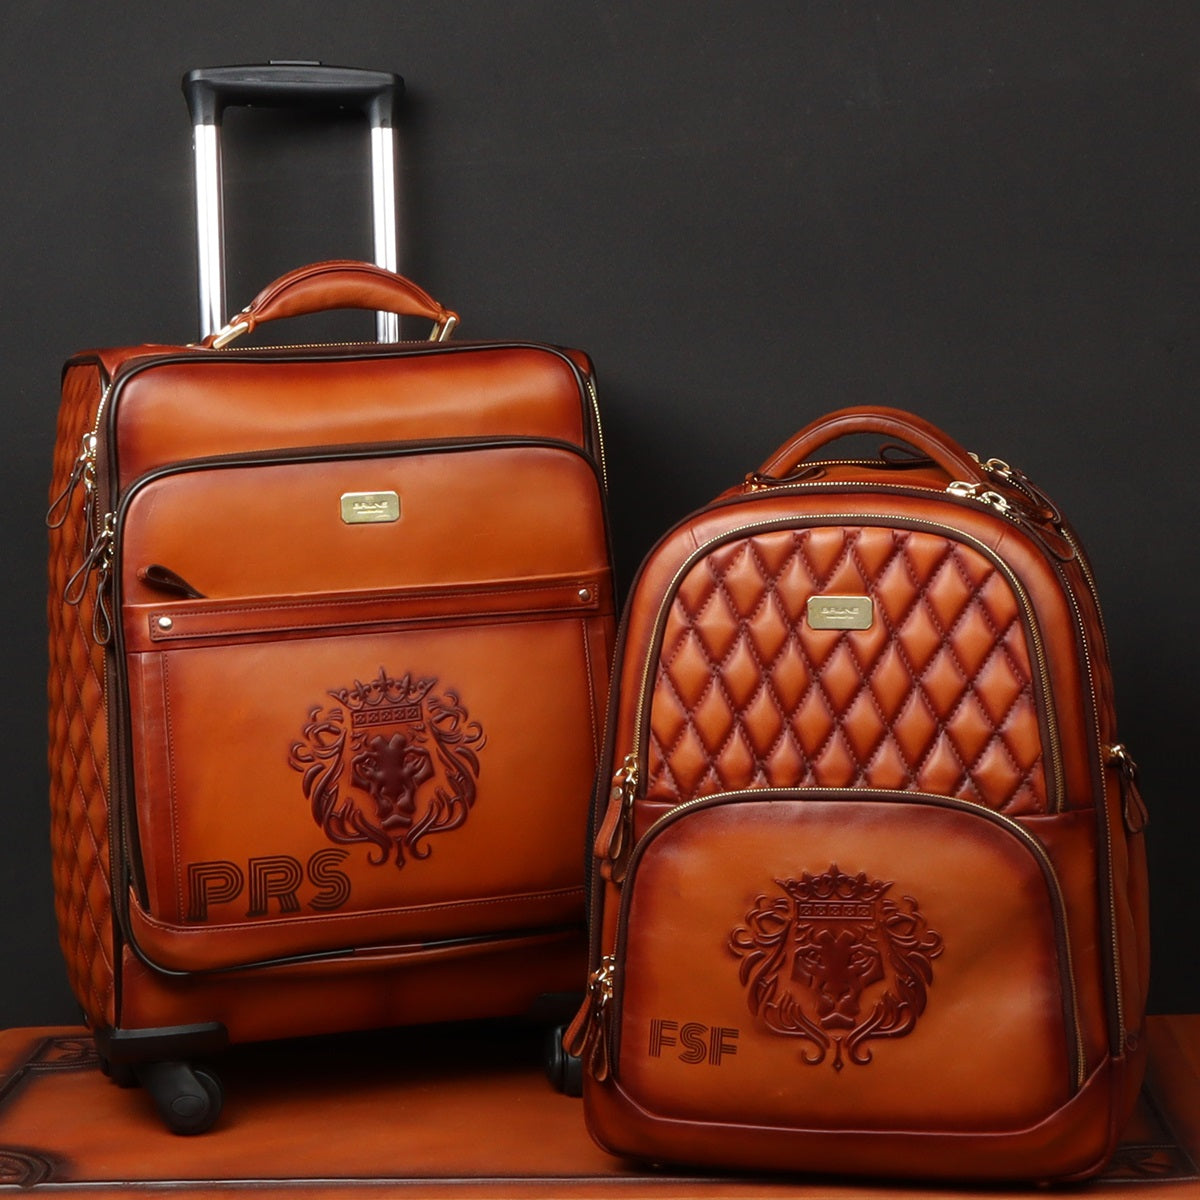 Customized Combo of Trolley Bag & Backpack of Tan Leather with Initials PRS/FSF by Brune & Bareskin